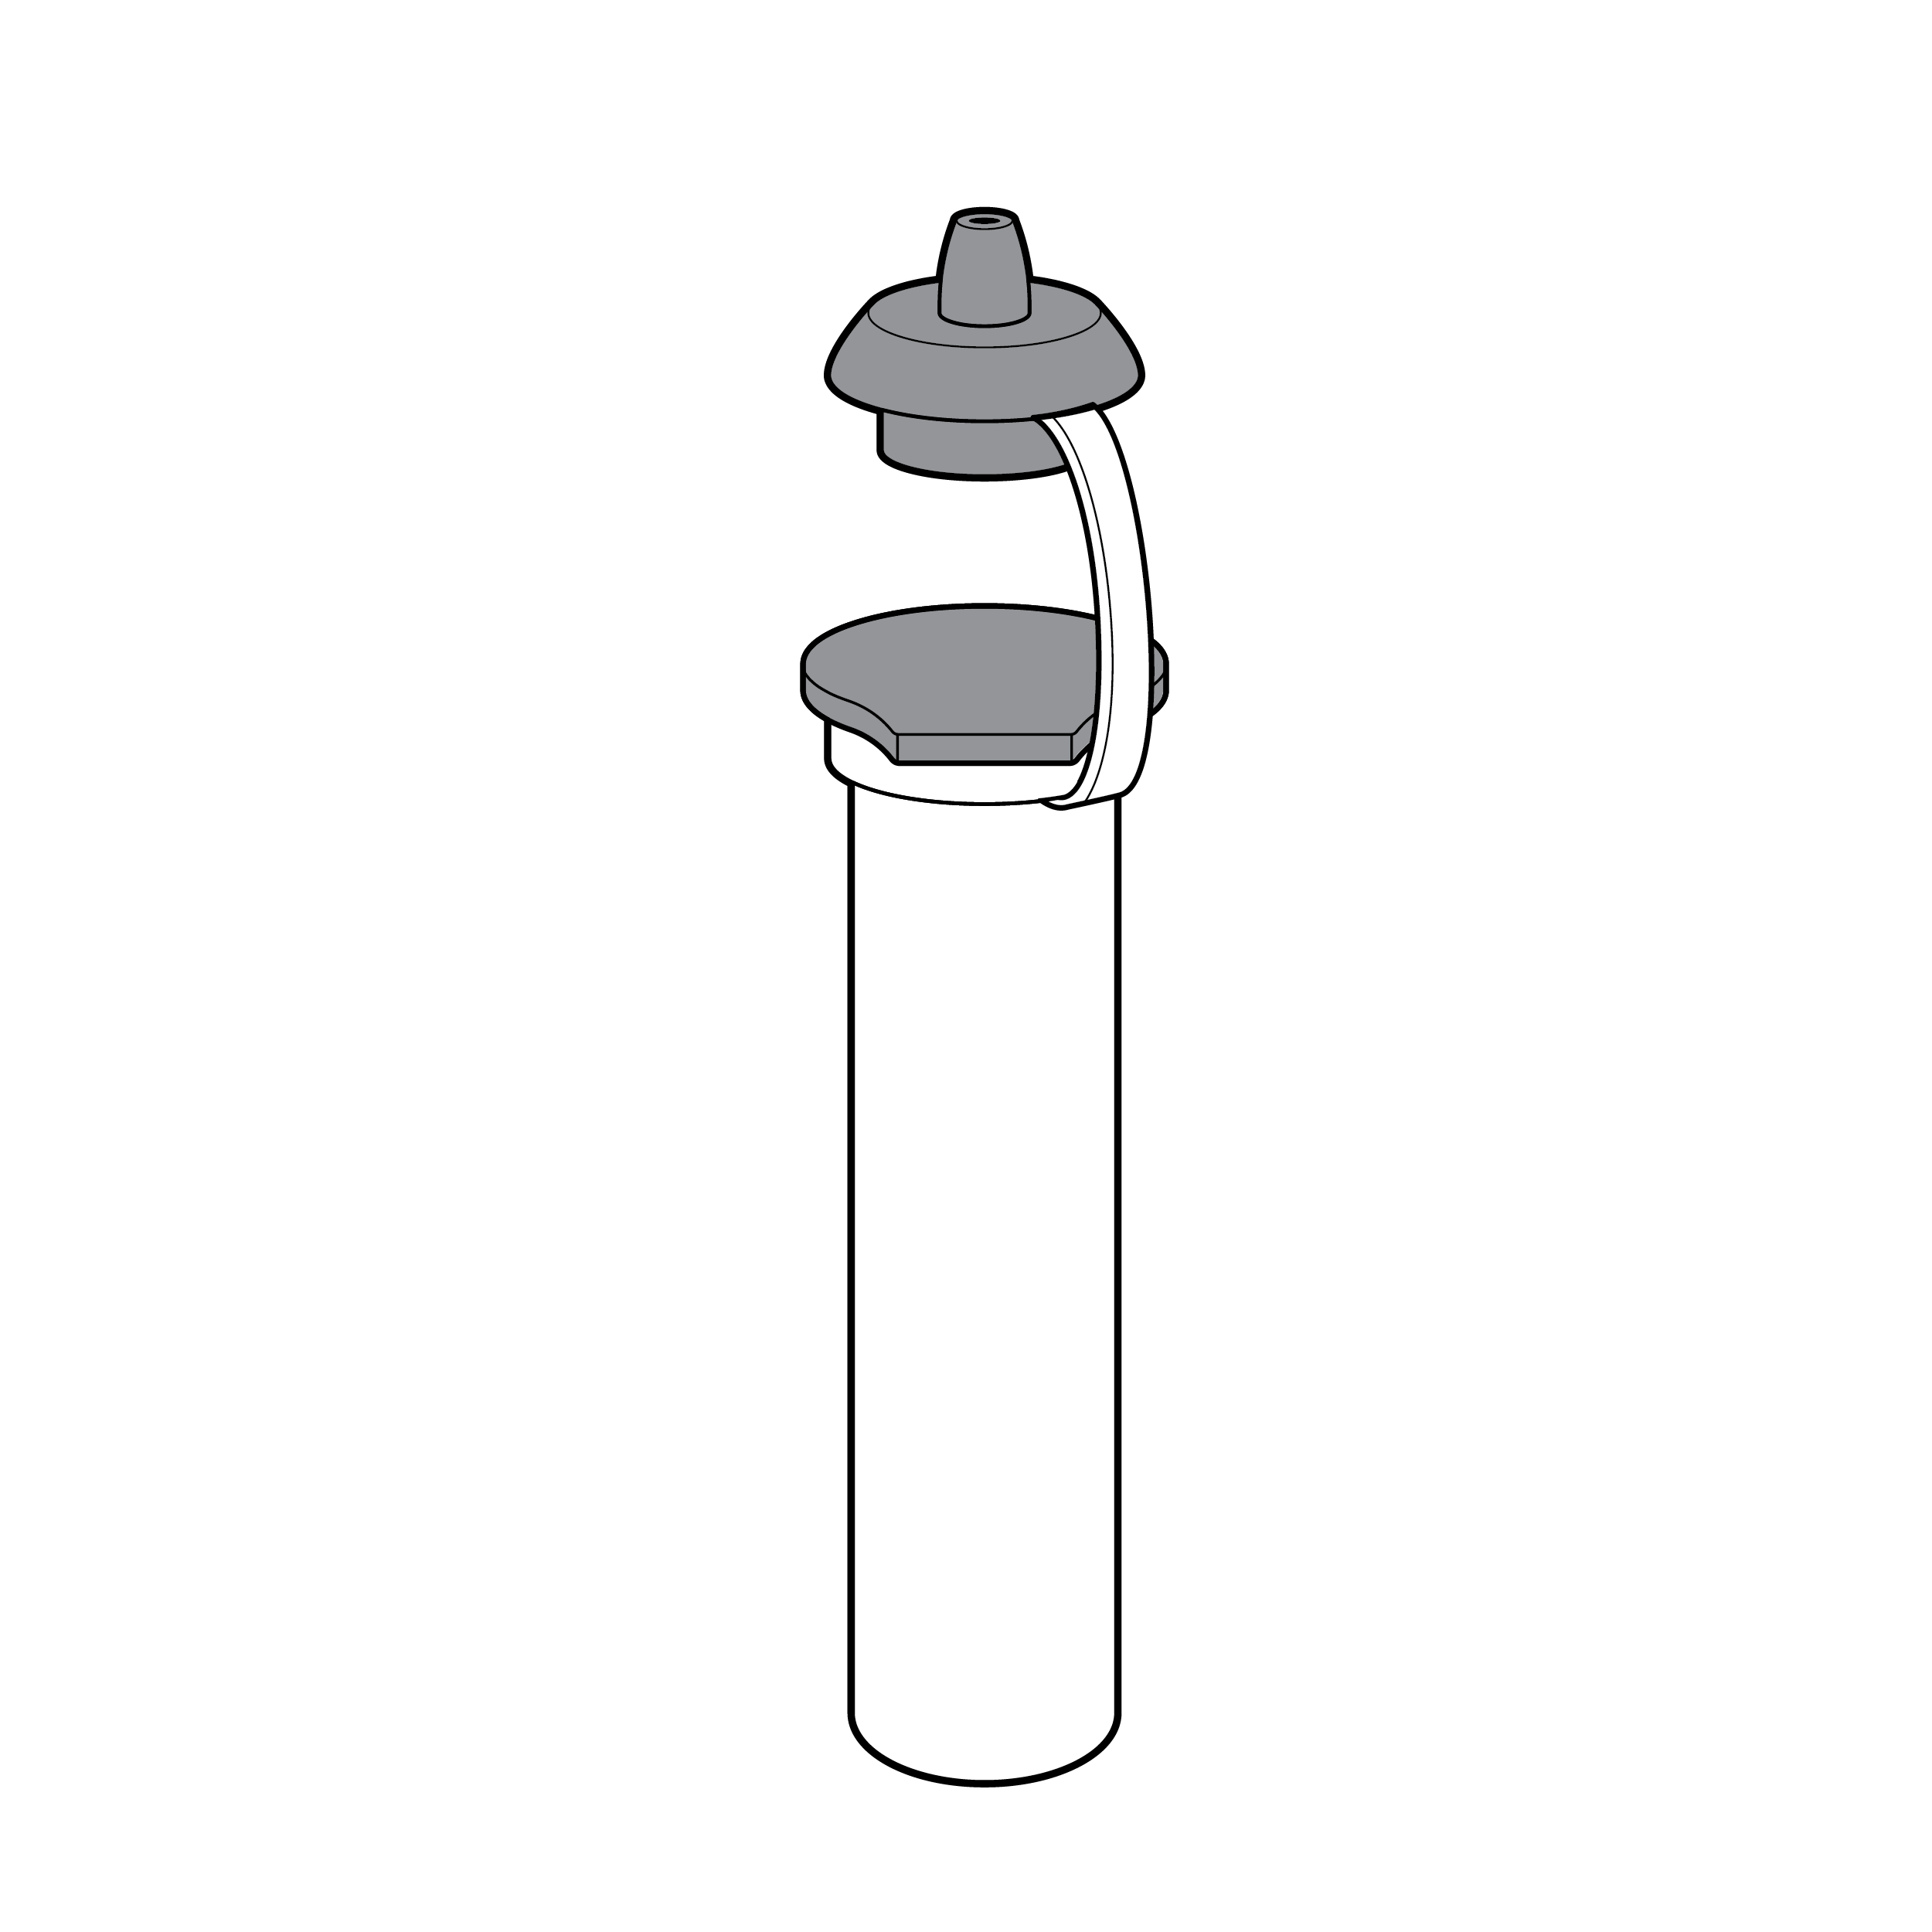 Perspective line drawing of a fluid vial with thick black lines and shading.